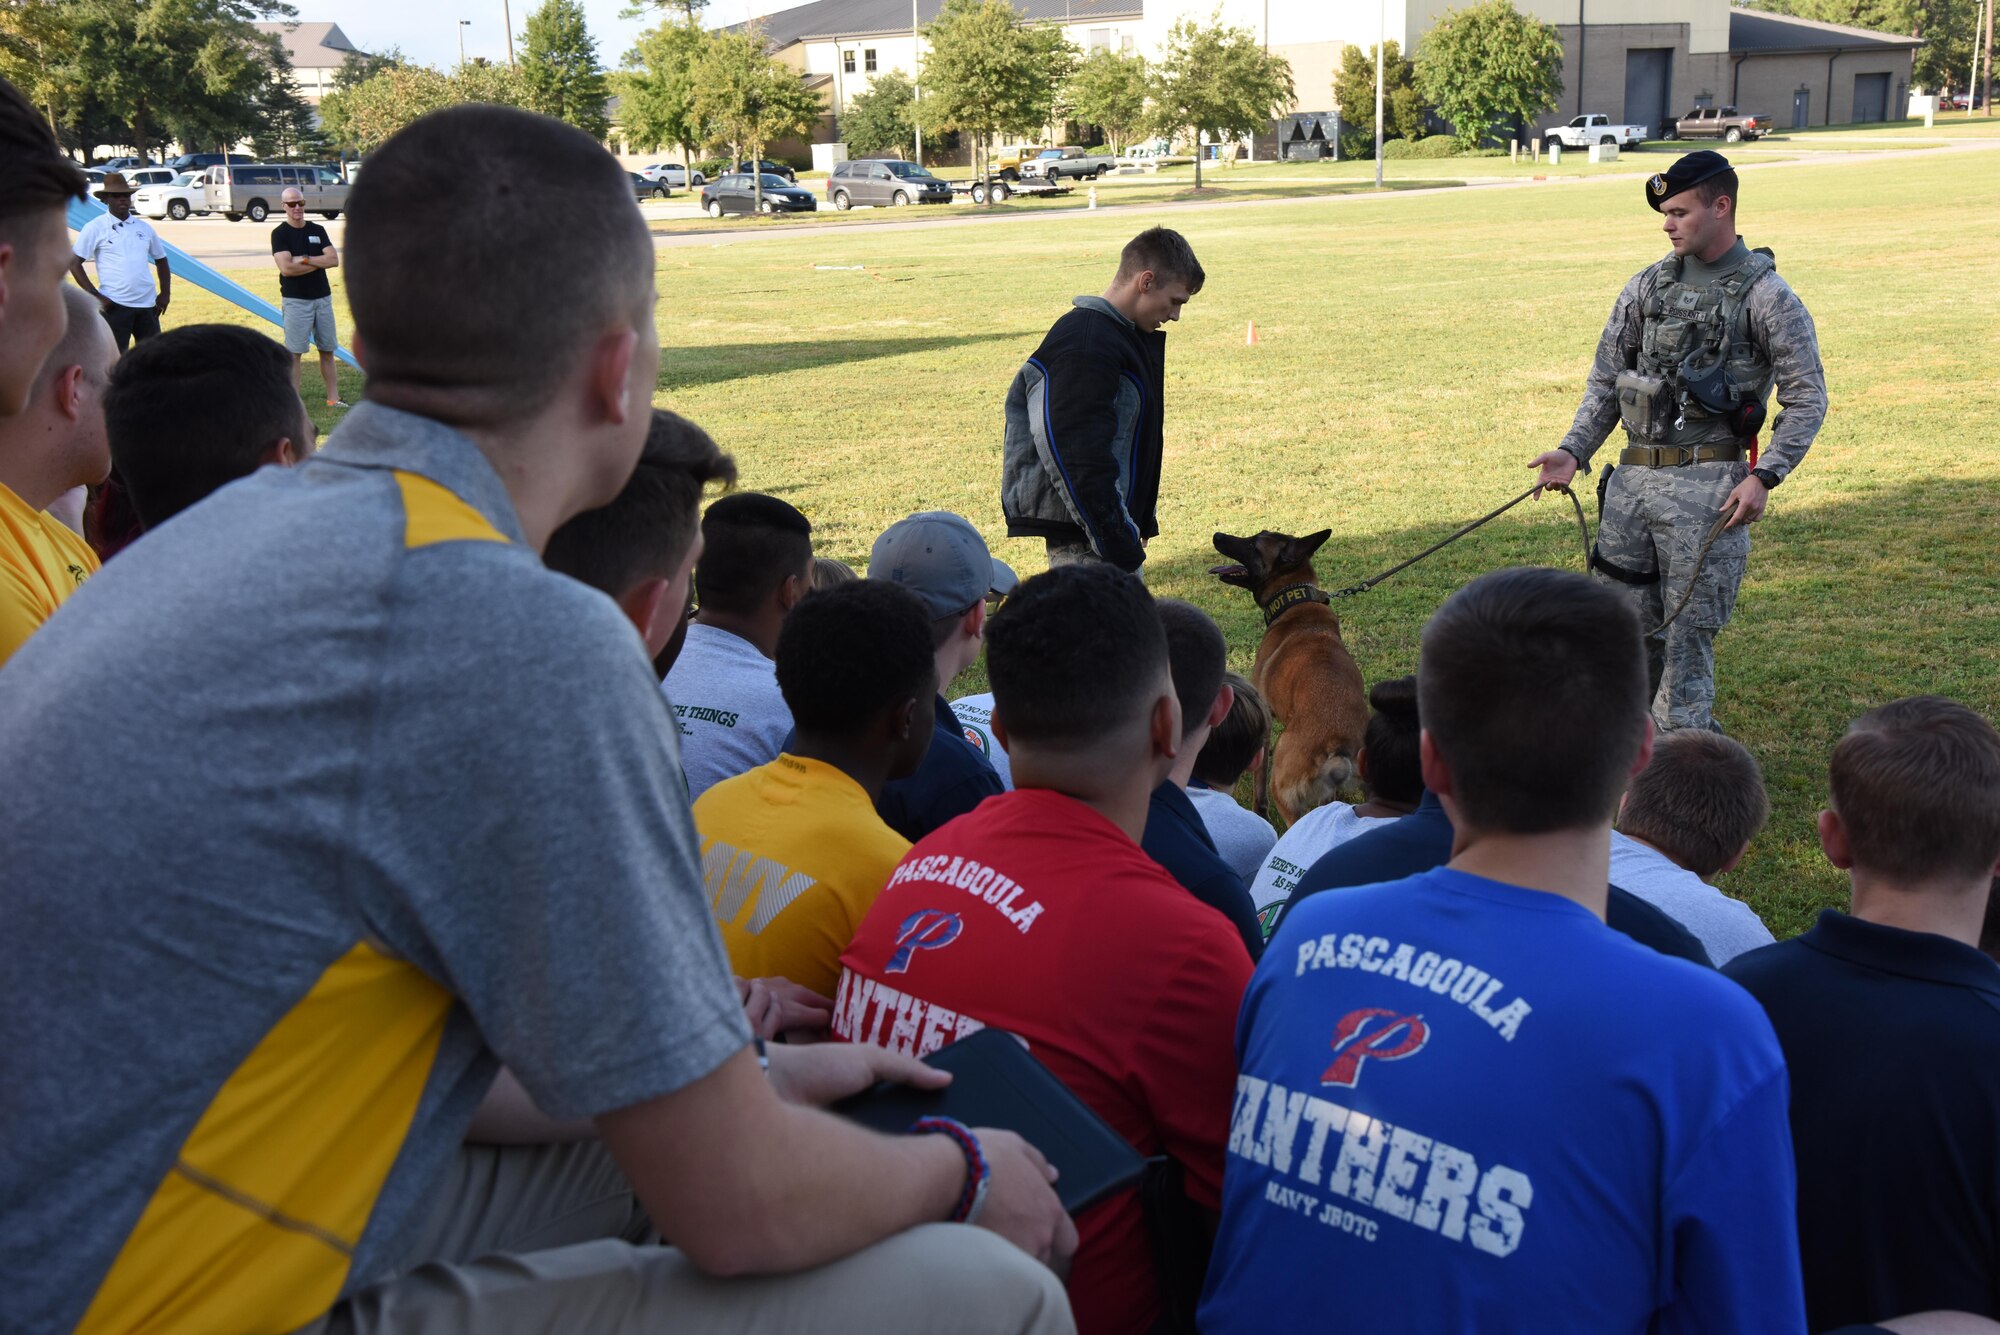 Members of the 81st Security Forces Squadron perform a military working dog demonstration at the Science, Technology, Engineering and Mathematics Diversity Outreach Day Sept. 15, 2017, on Keesler Air Force Base, Mississippi. The event consisted of 10 Mississippi gulf coast high school Junior ROTC units receiving information about Air Force opportunities and accession requirements with an emphasis on STEM. They also competed in several team building activities. (U.S. Air Force photo by Kemberly Groue)